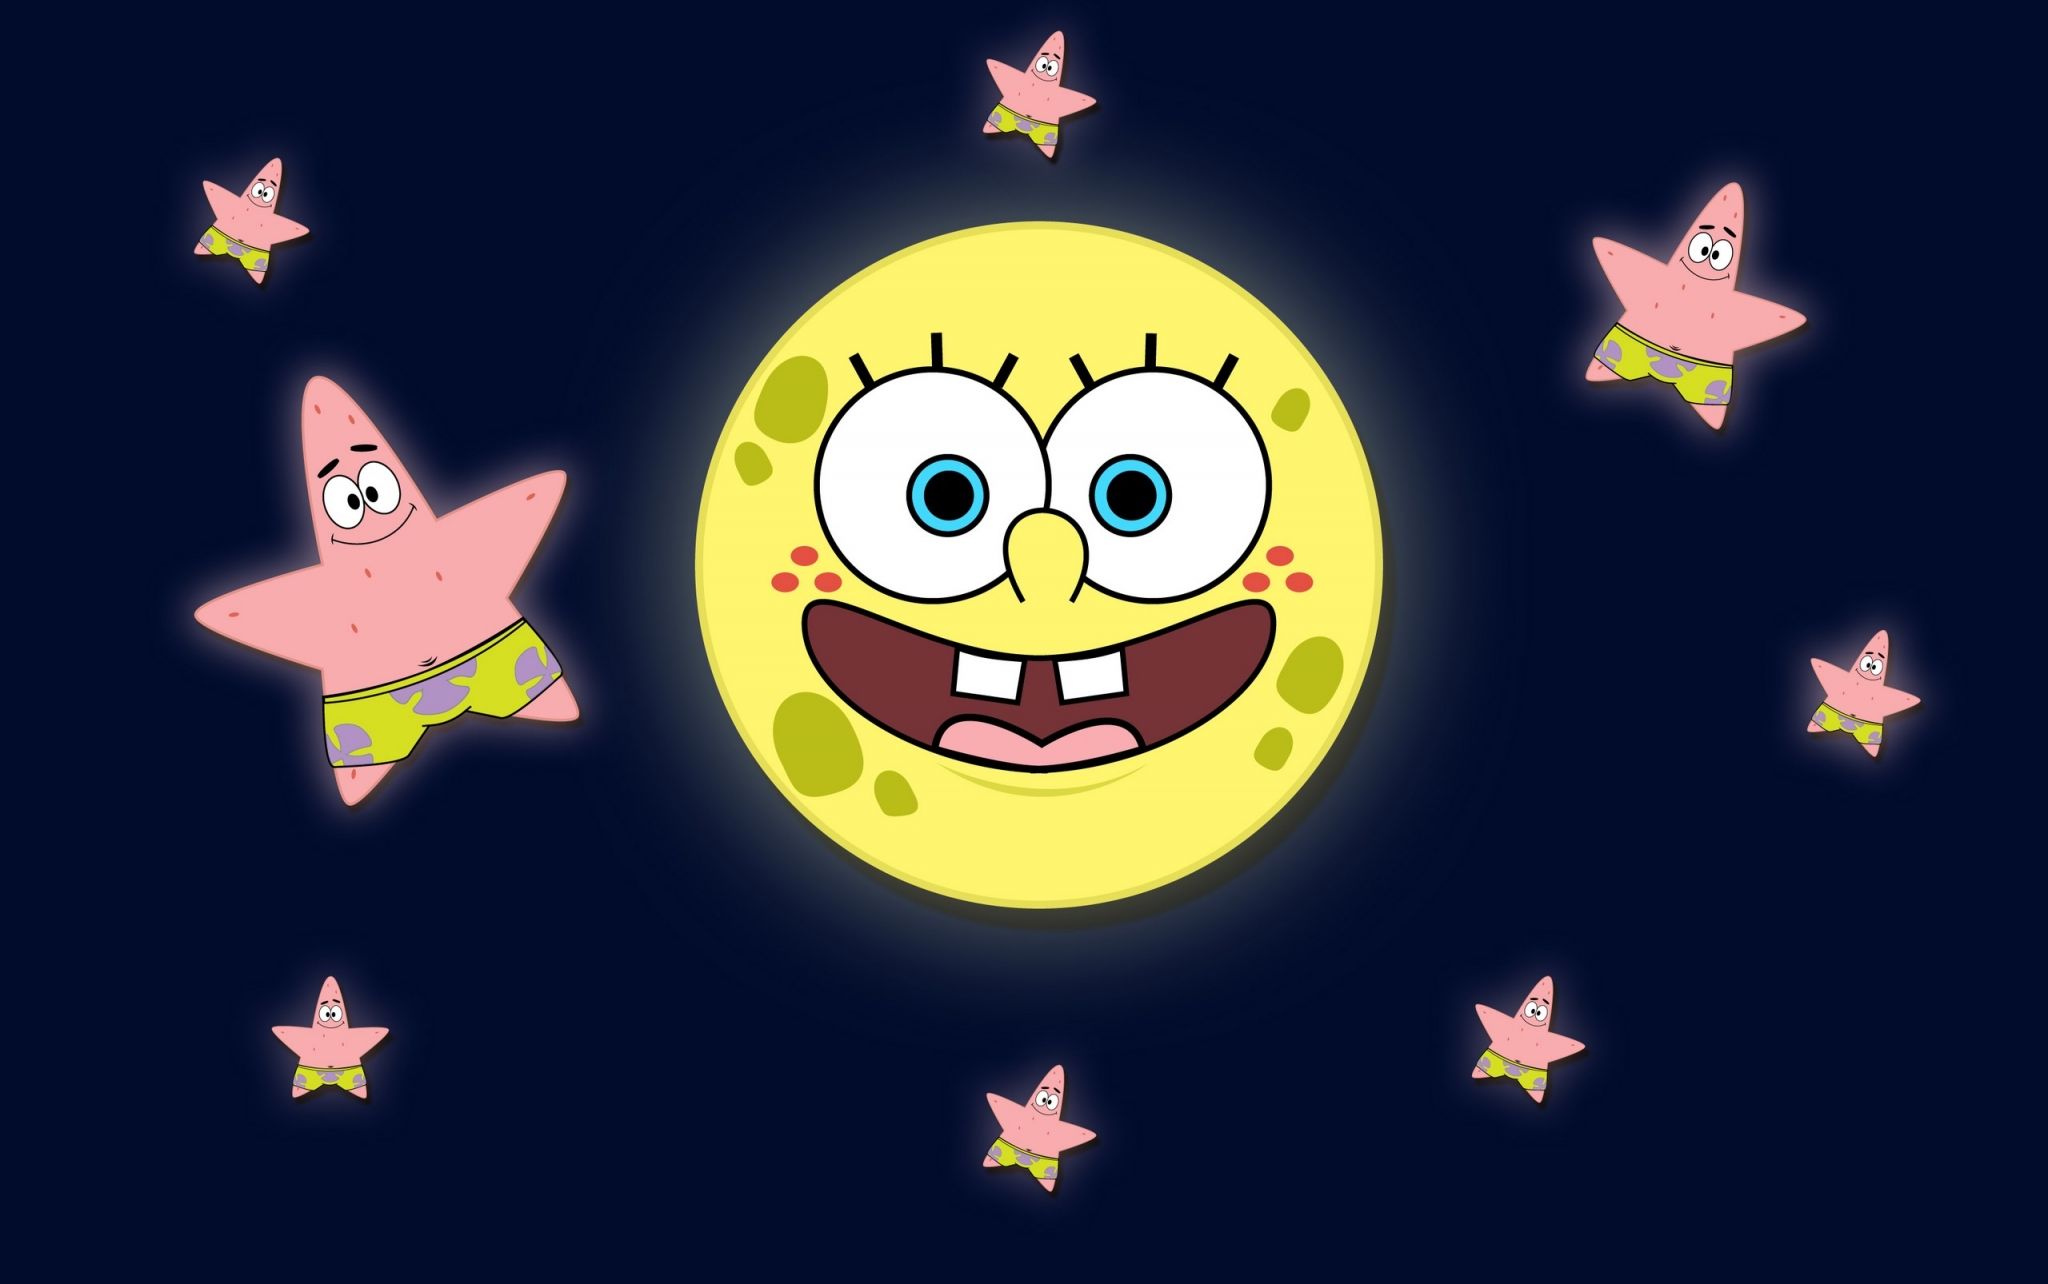 Wallpaper of a smiling moon with stars around it - SpongeBob